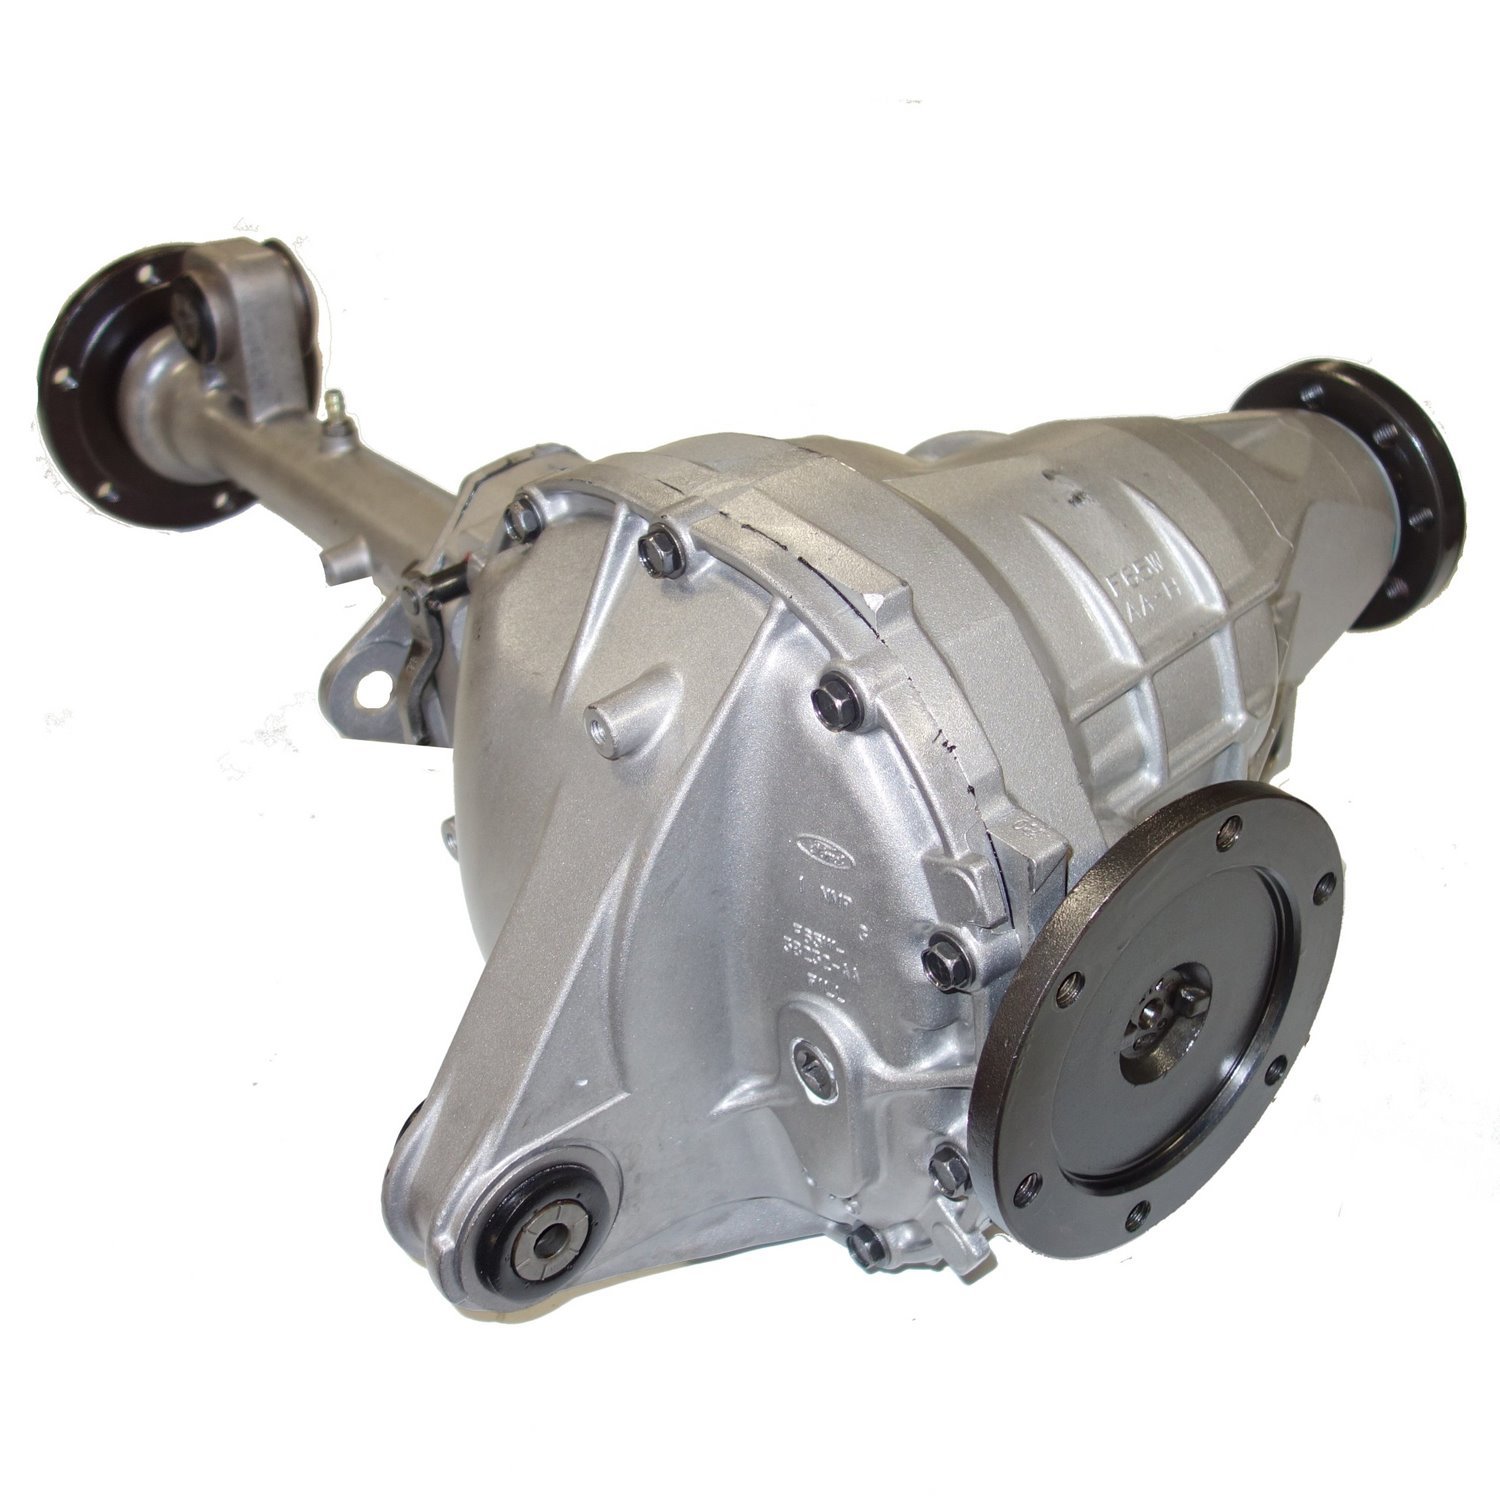 Remanufactured Axle Assembly for Ford 8.8 IFS 97-04 Ford F150 3.73 Ratio